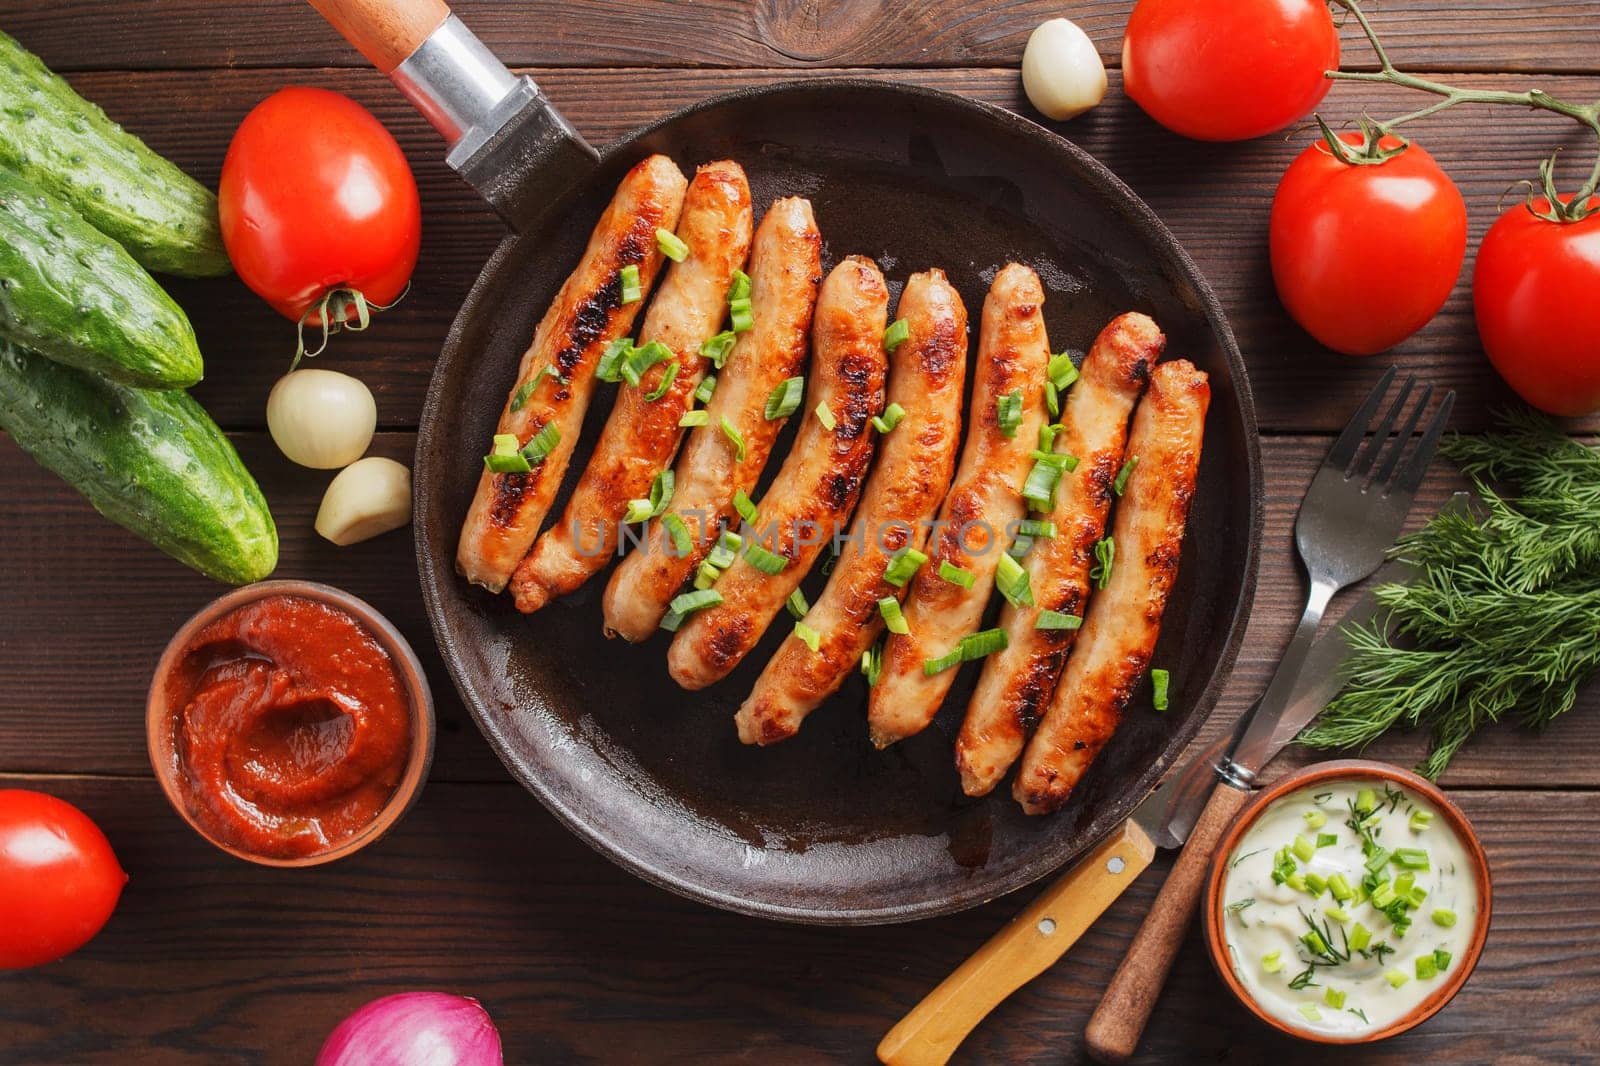 Delicious sausages cooked in a pan with vegetables and various sauces on a wooden table. by lara29